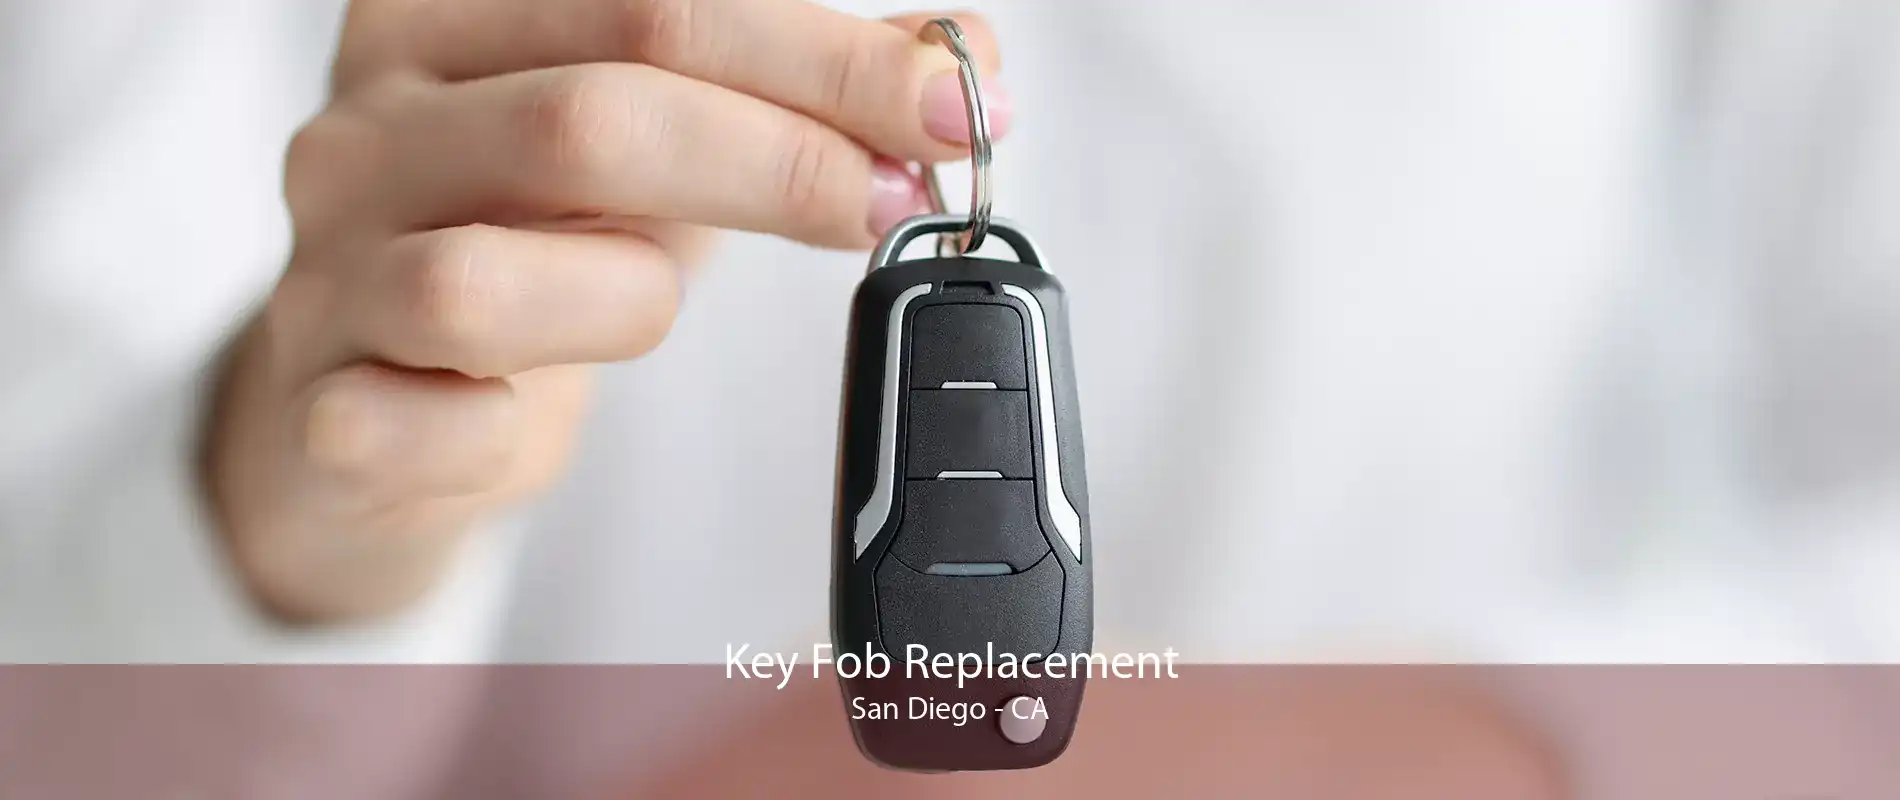 Key Fob Replacement San Diego - CA